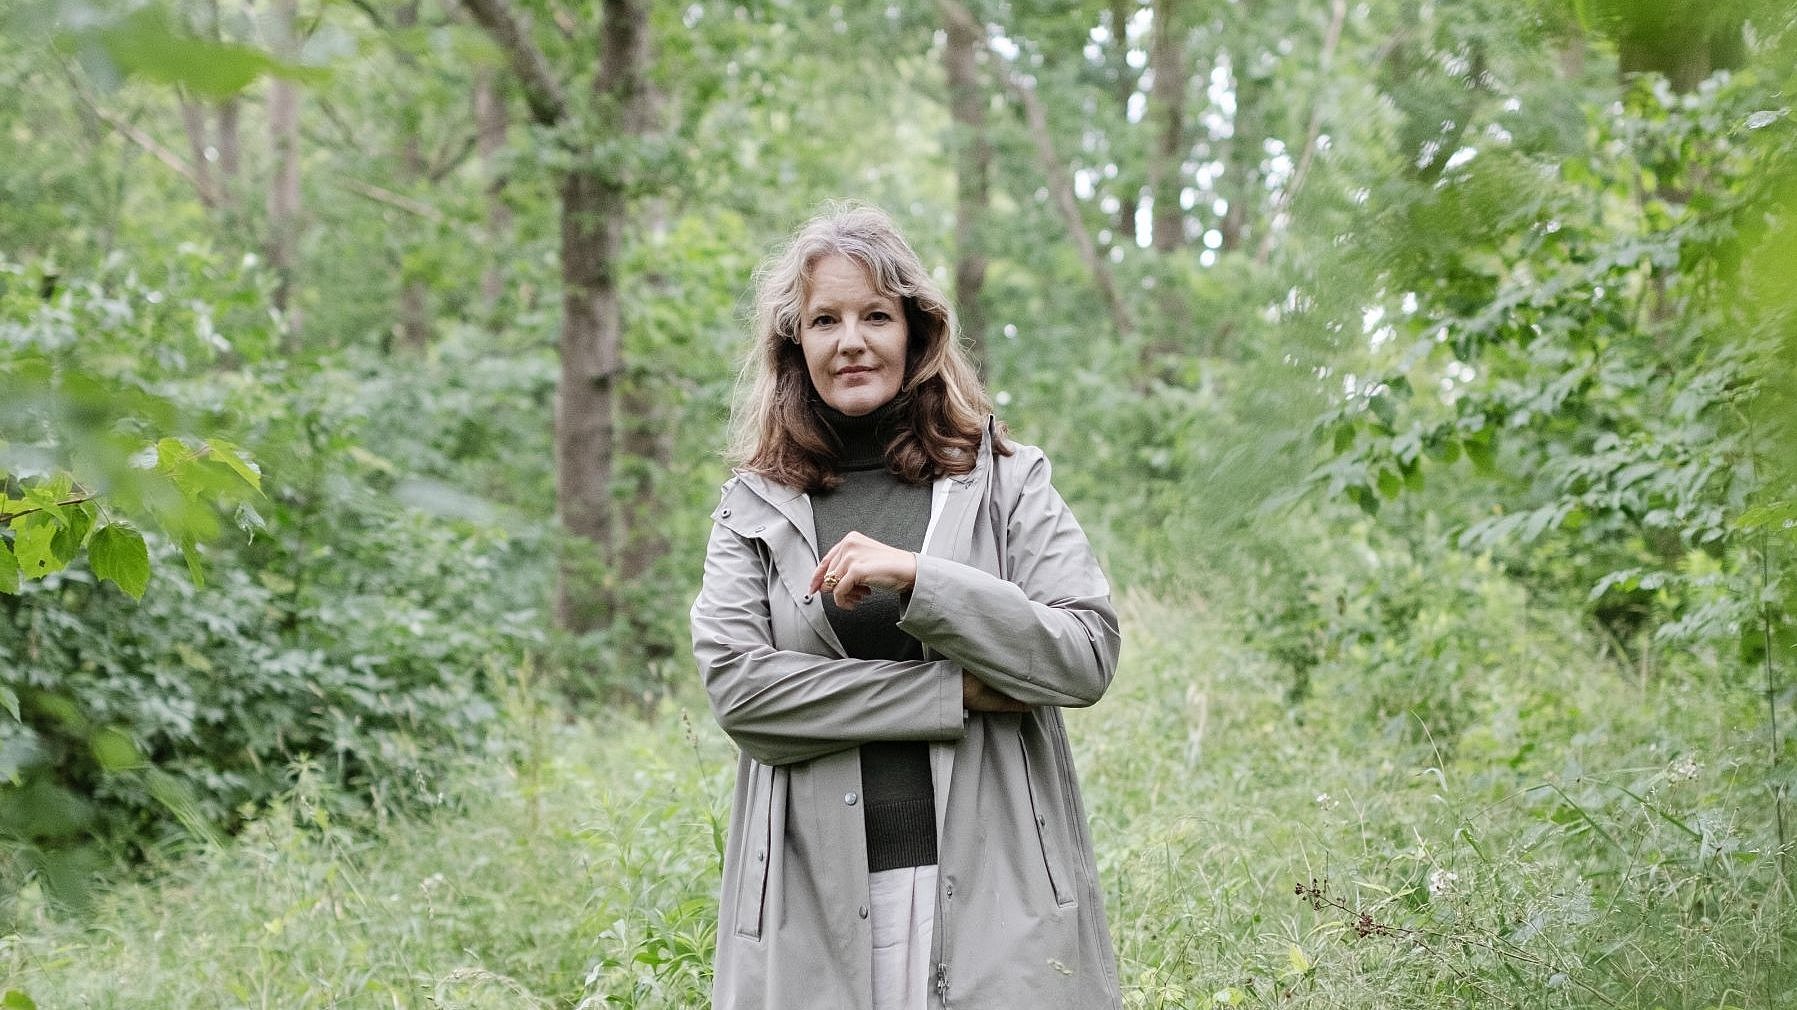 Christine Nellemann, Dean of Sustainability at the Technical University of Denmark, photographed in a wooded area